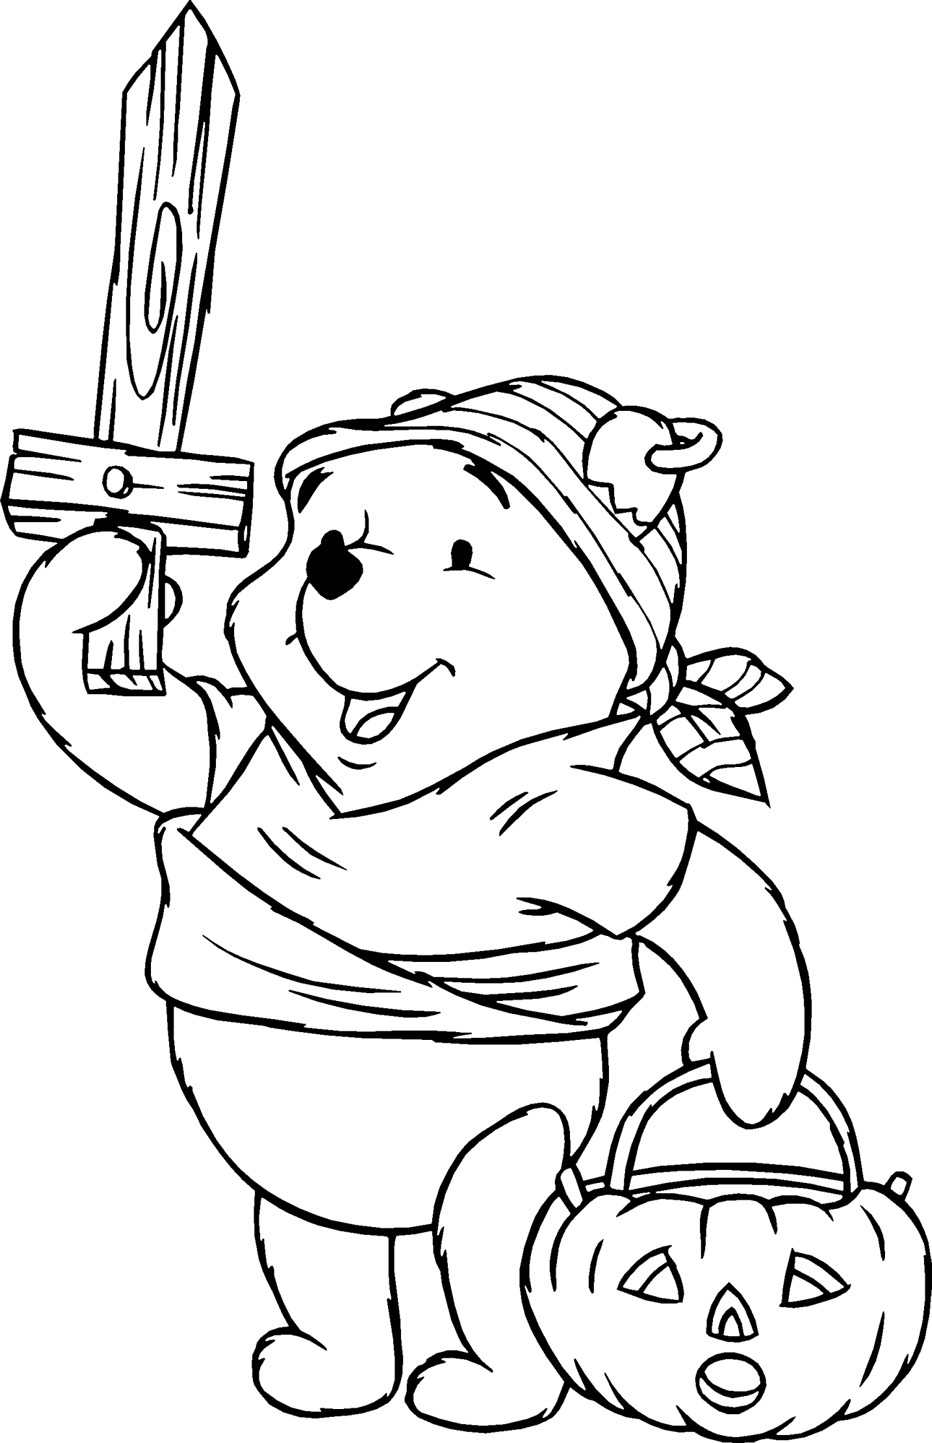  Kids Coloring Pages Printable   4